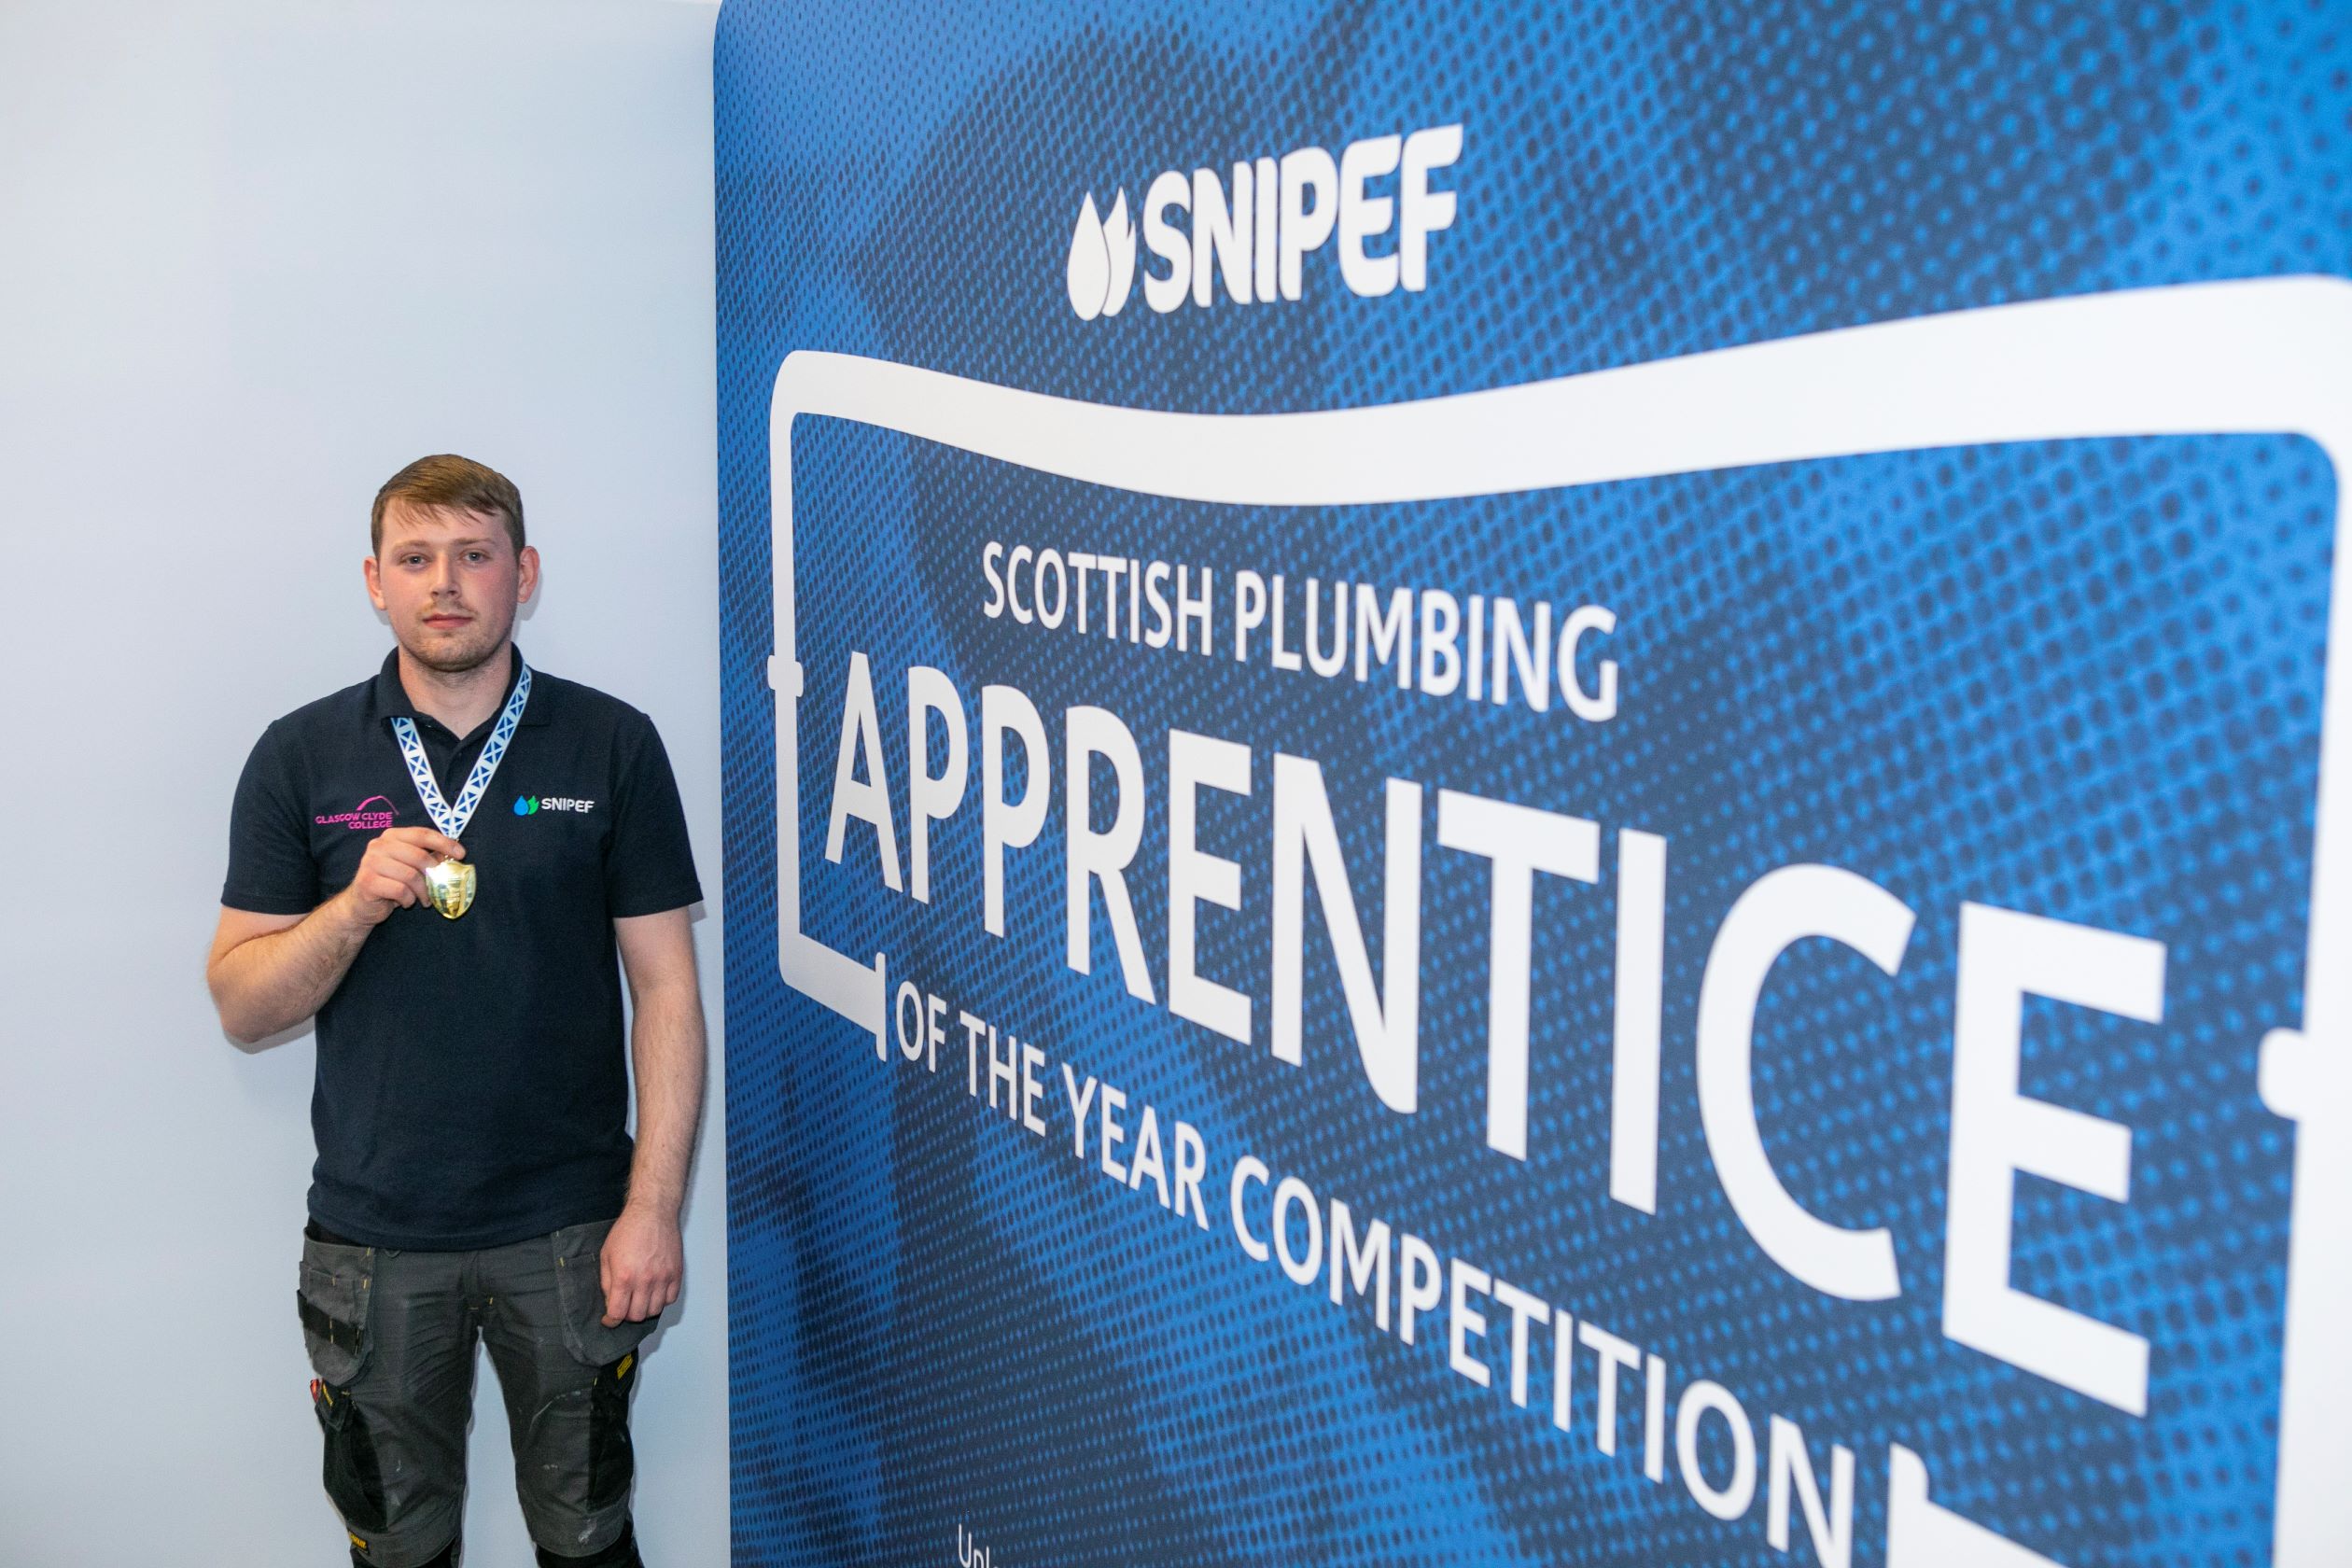 Apprentices excel in Scottish Plumbing Apprentice of the Year competition